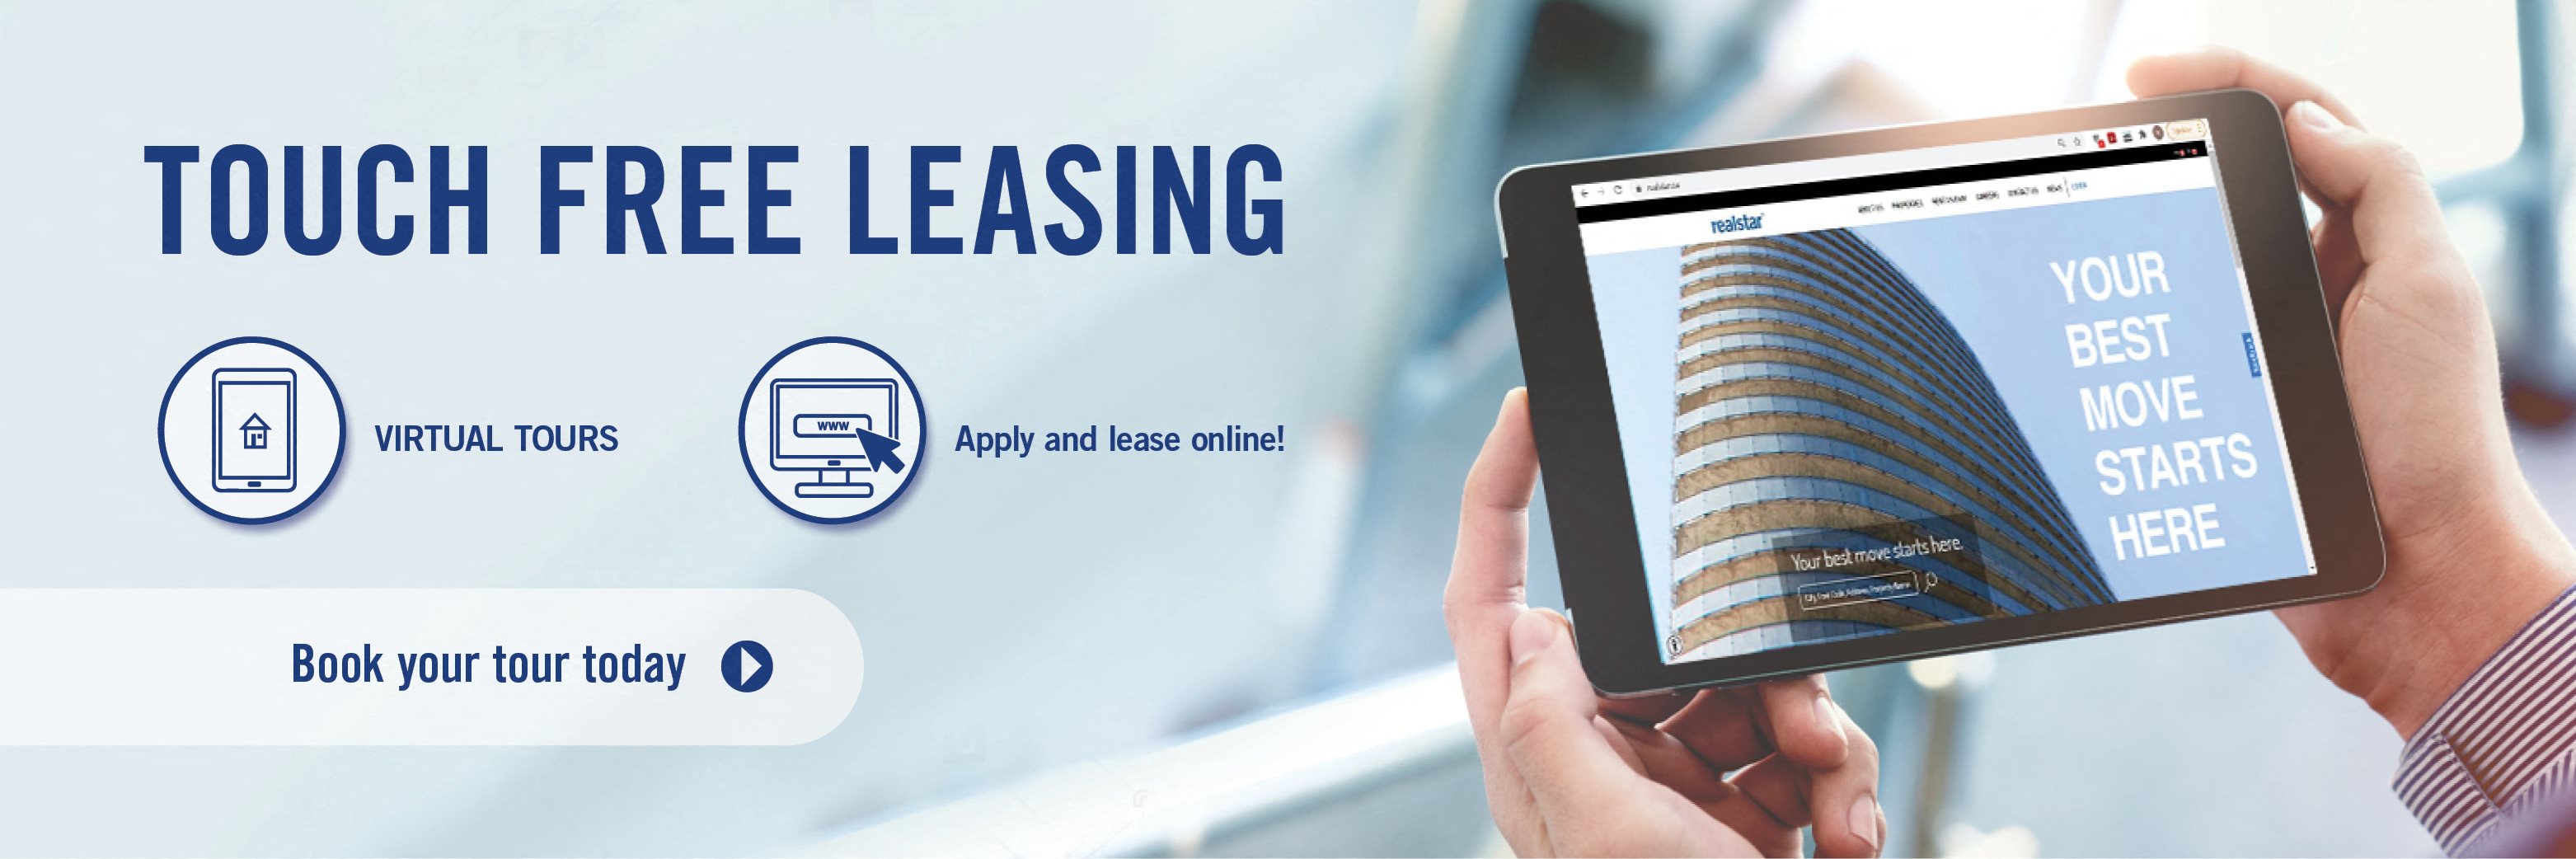 Touch Free Leasing - click to book a tour today